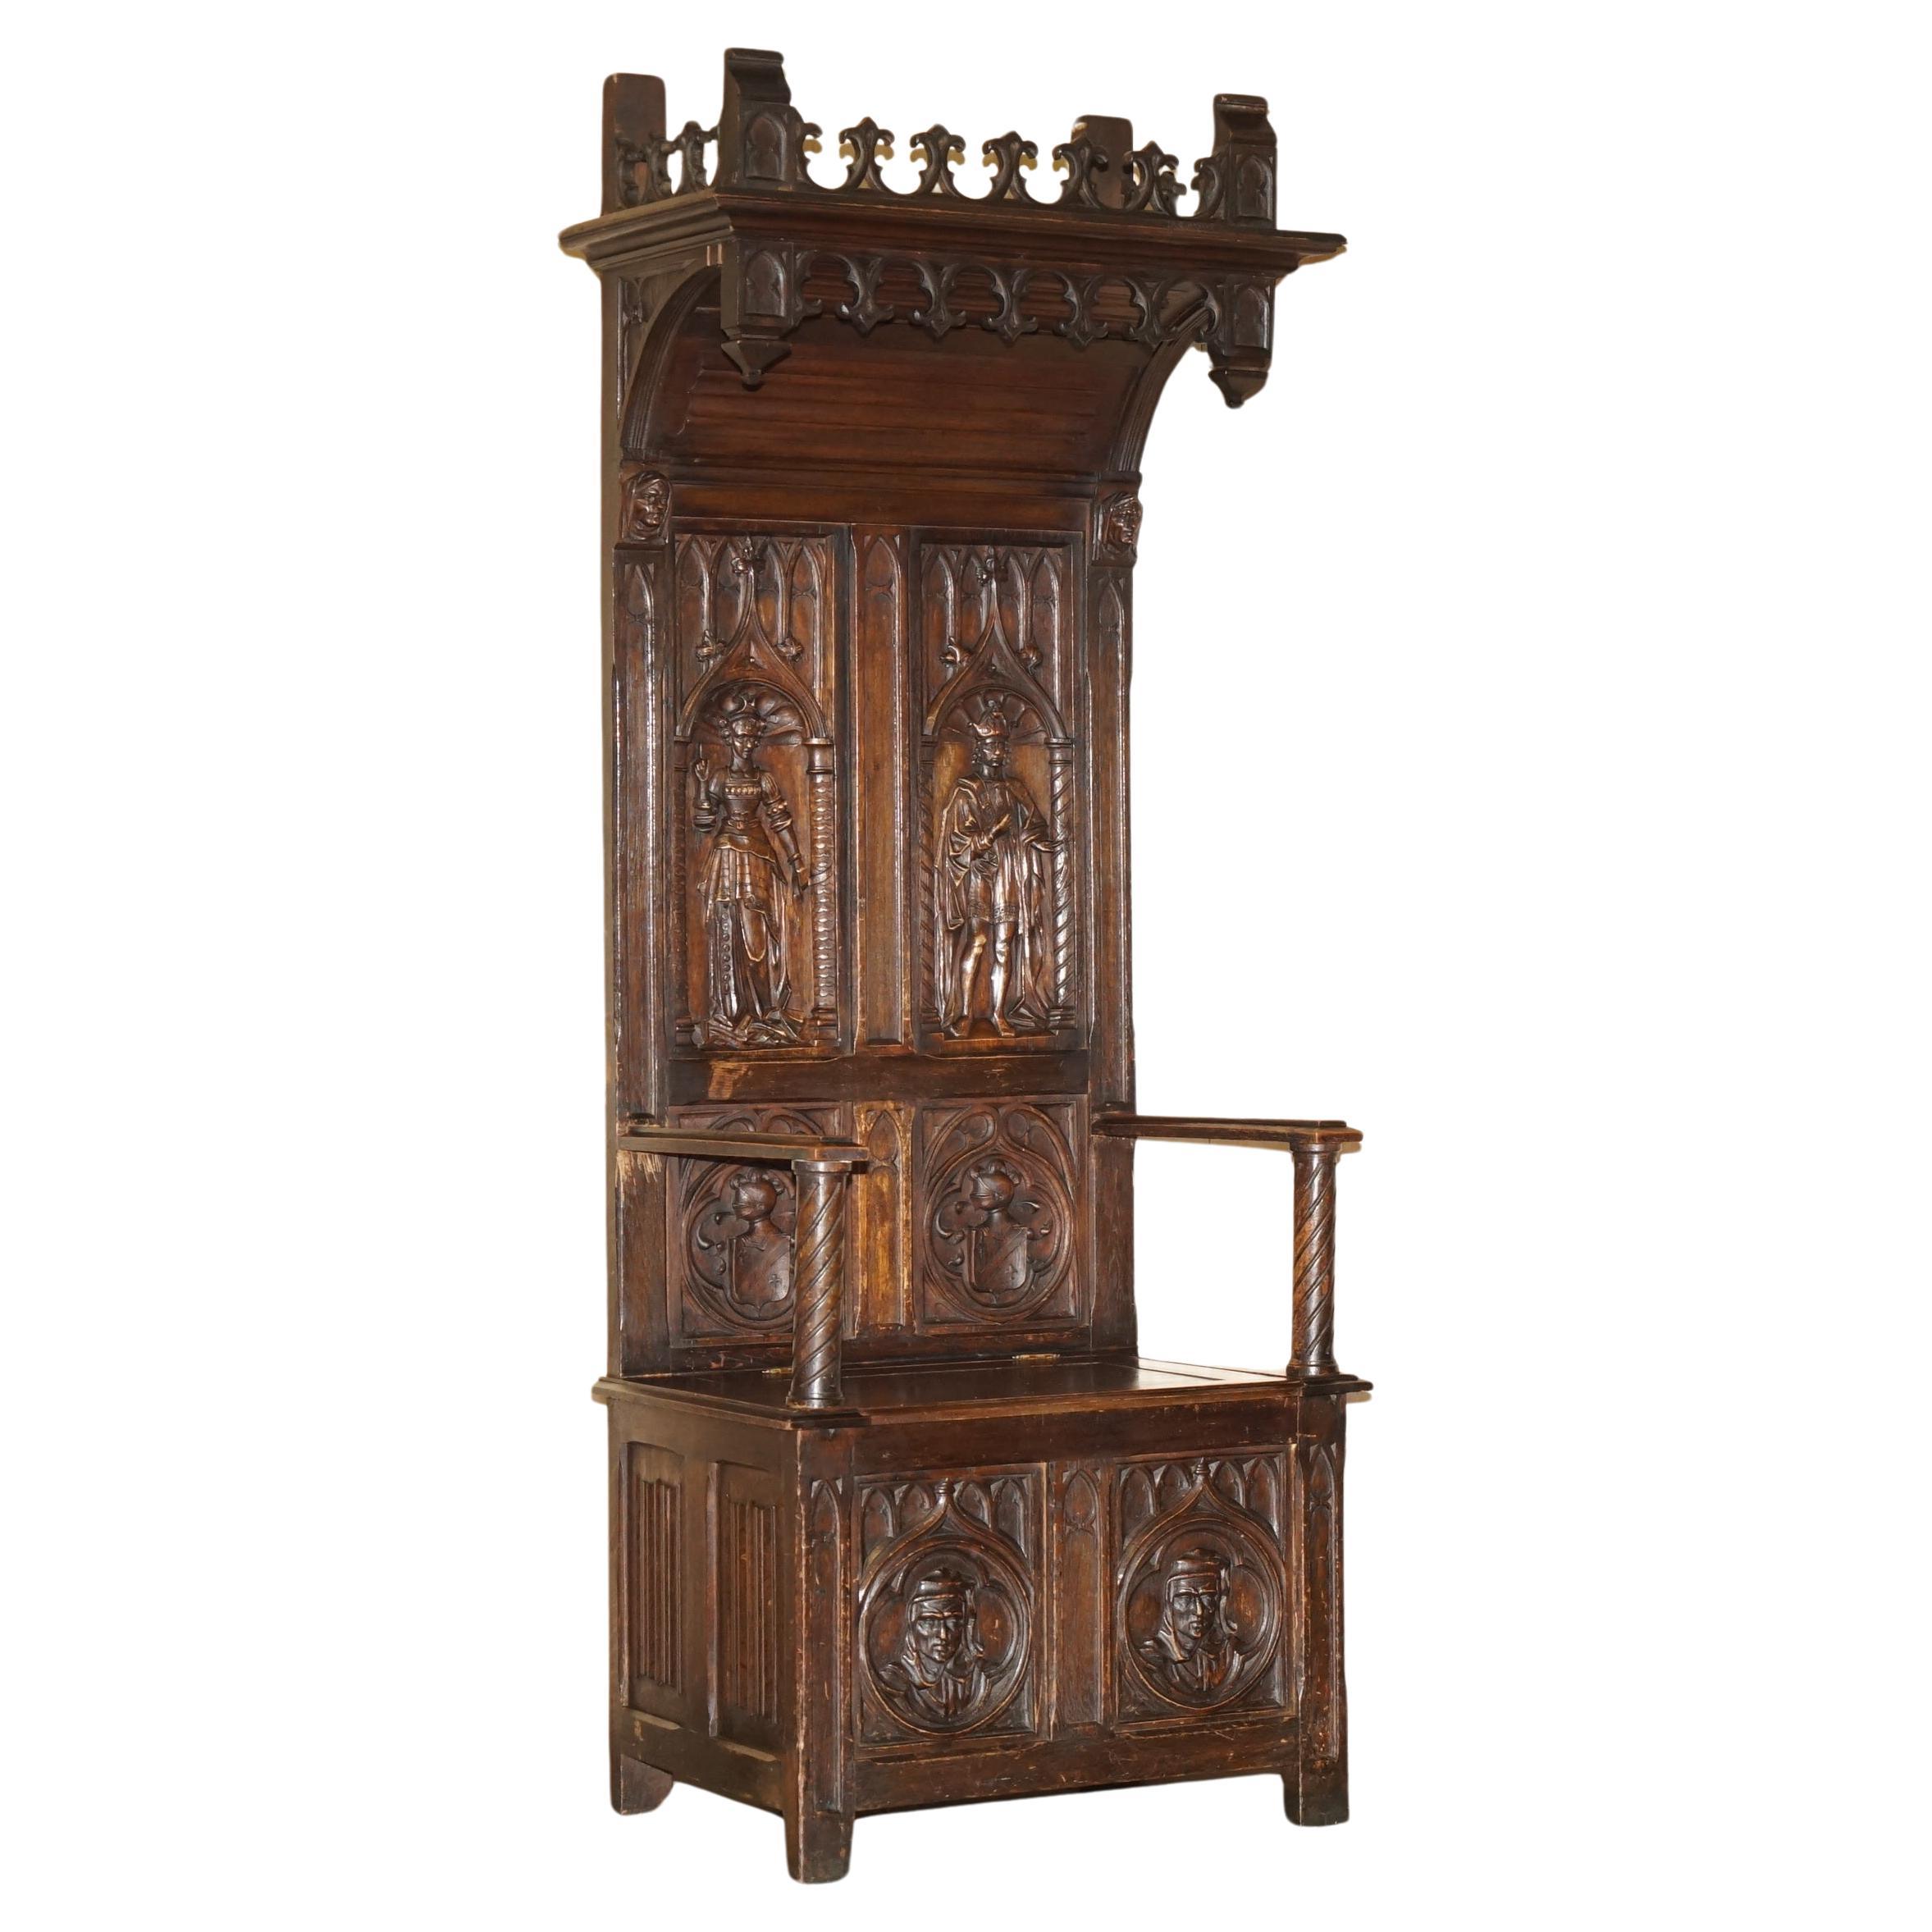 FINE ANTIQUE CiRCA 1860 JACOBEAN GOTHIC REVIVAL HAND CARVED PORTERS HALL CHAIR For Sale